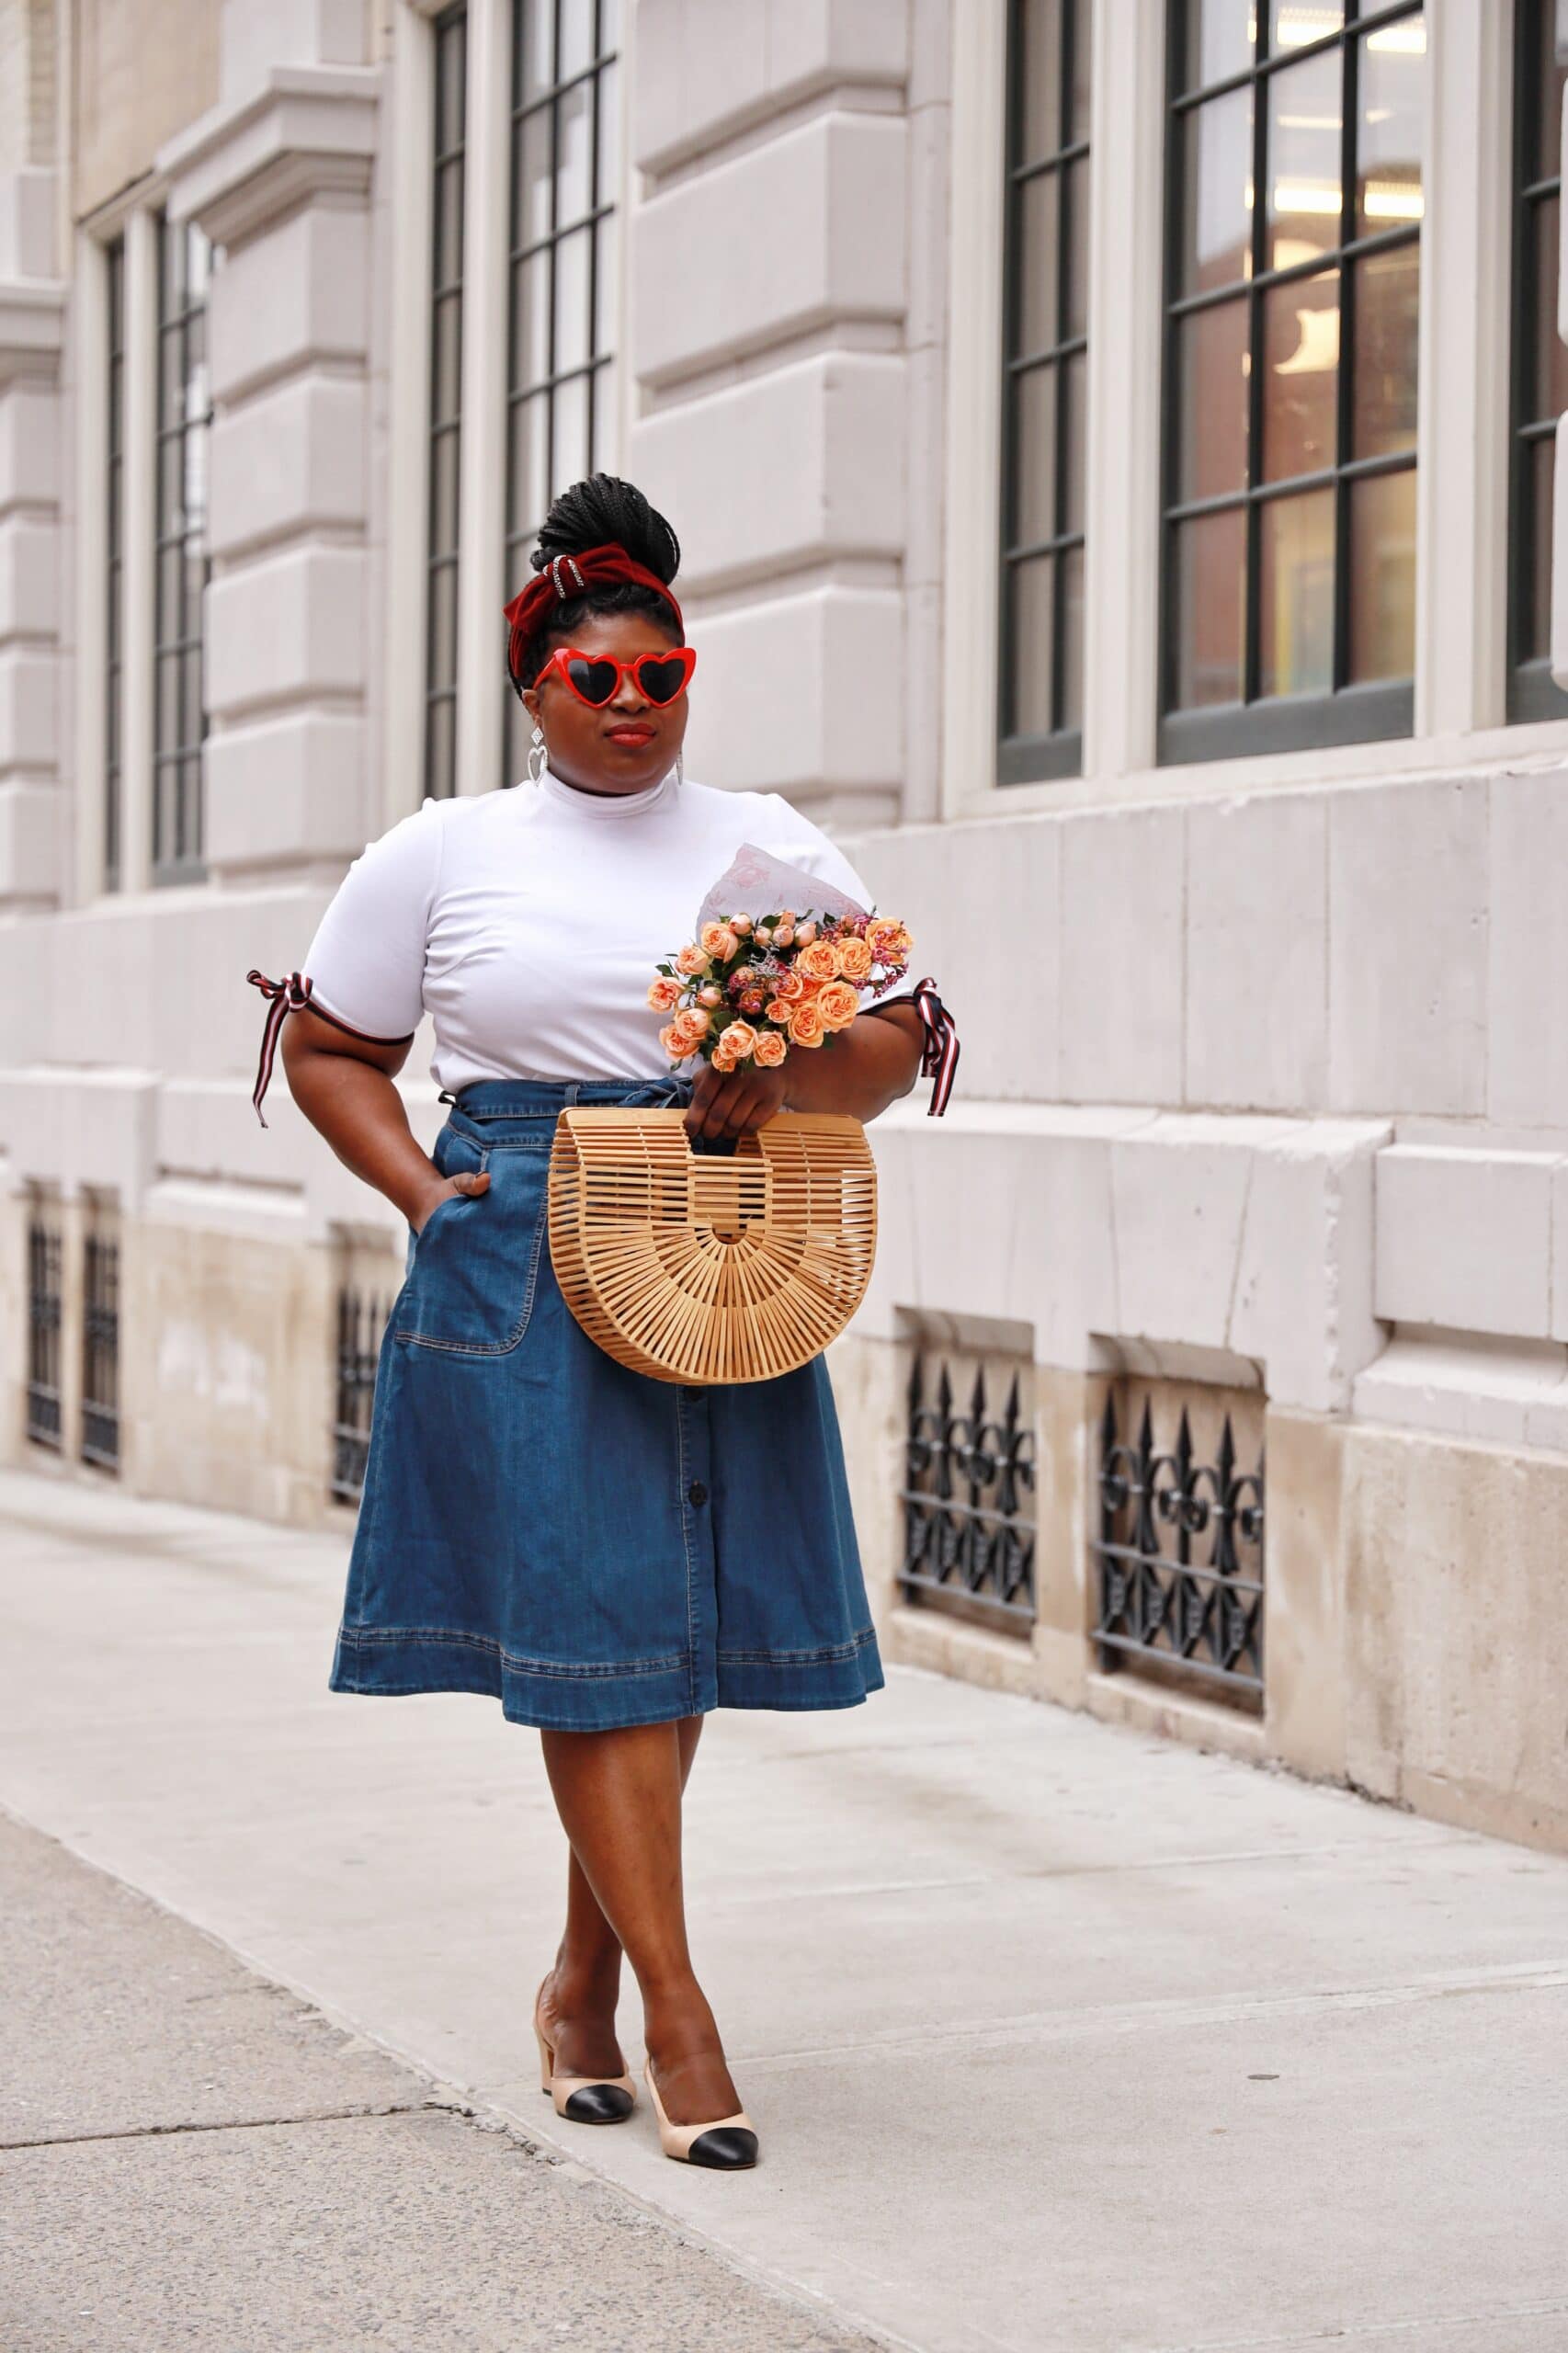 The best denim skirts for curvy figures